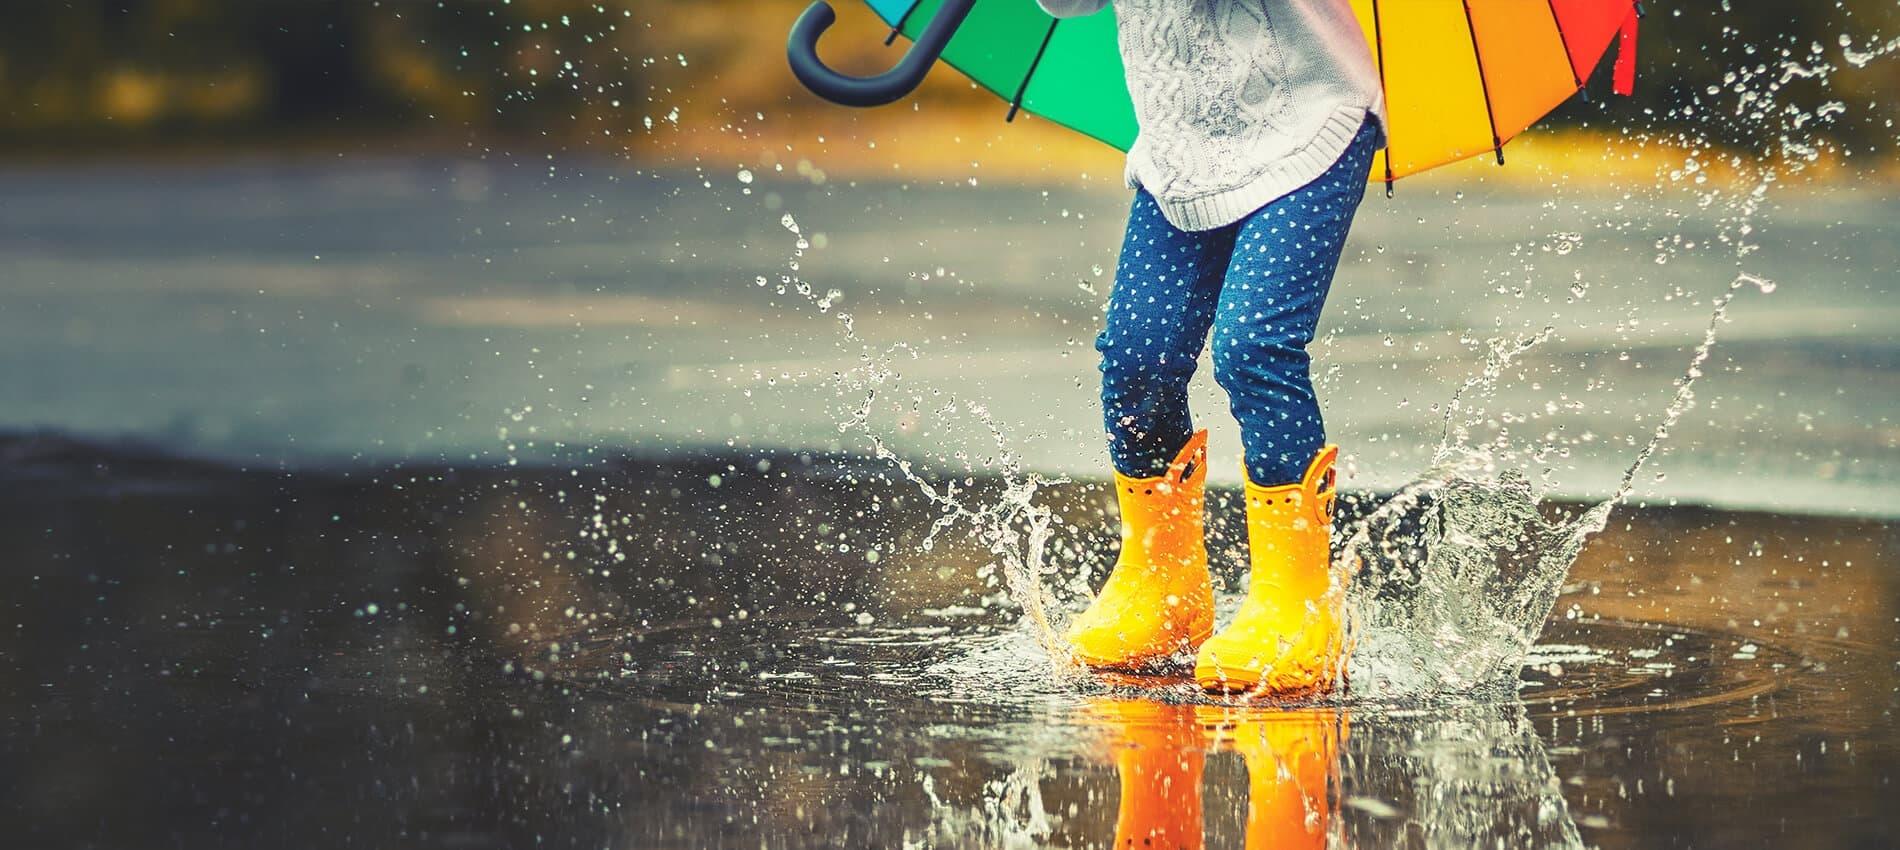 Child wearing rain boots jumping in a puddle with an umbrella